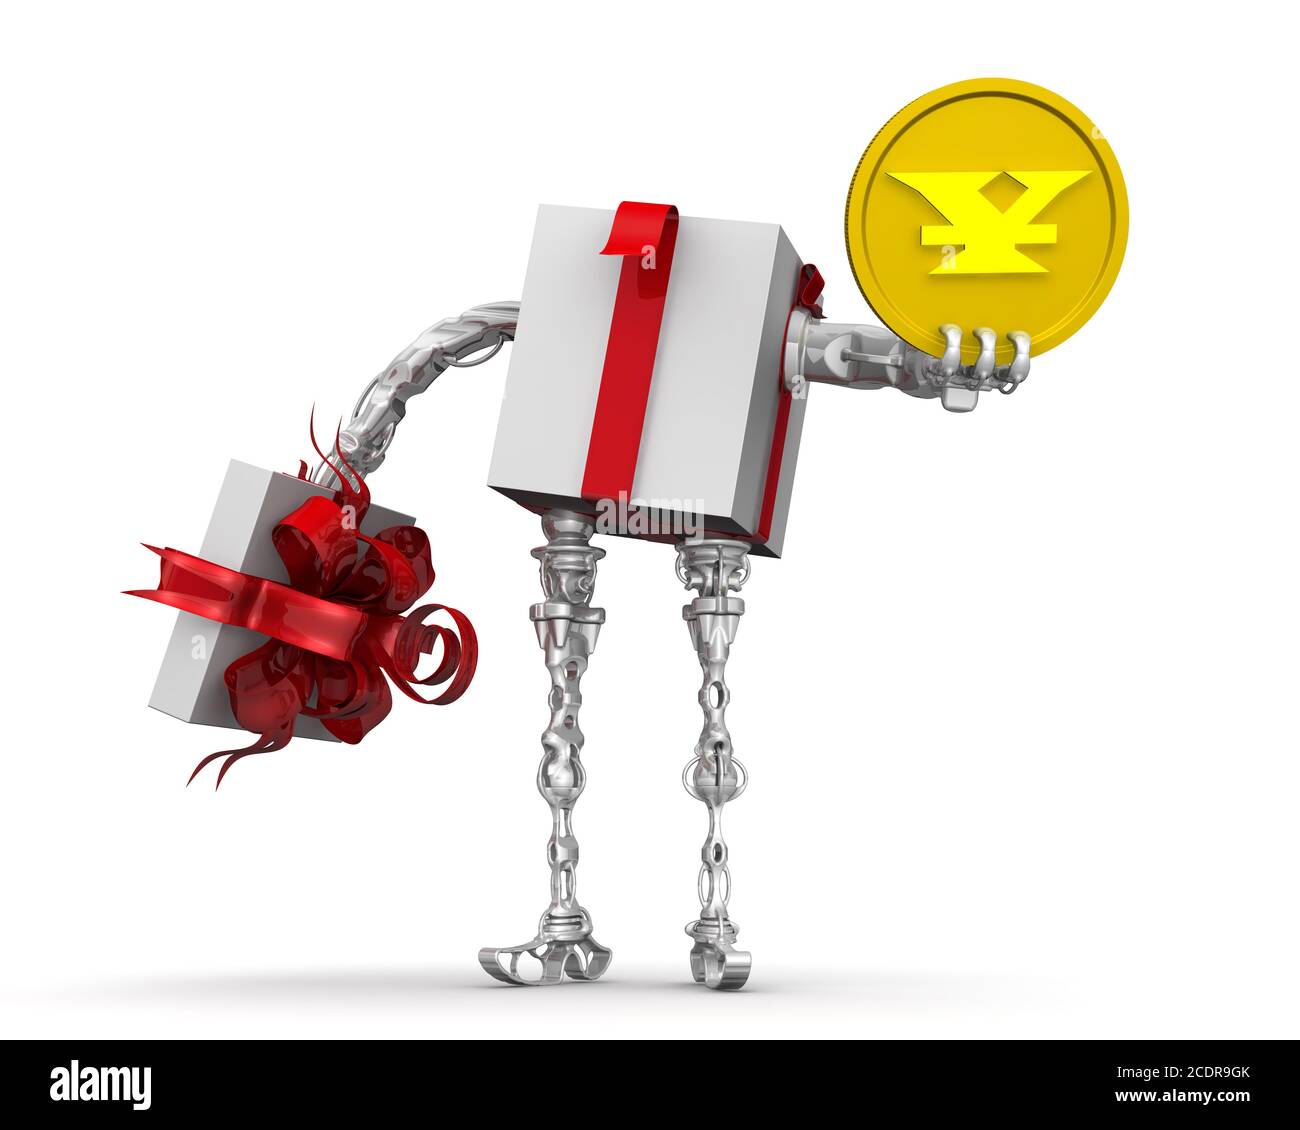 Money - the best gift. Cyborg as a open gift box (with hands and feet) holding a gold coin with the symbol of the Chinese currency - yuan. Stock Photo